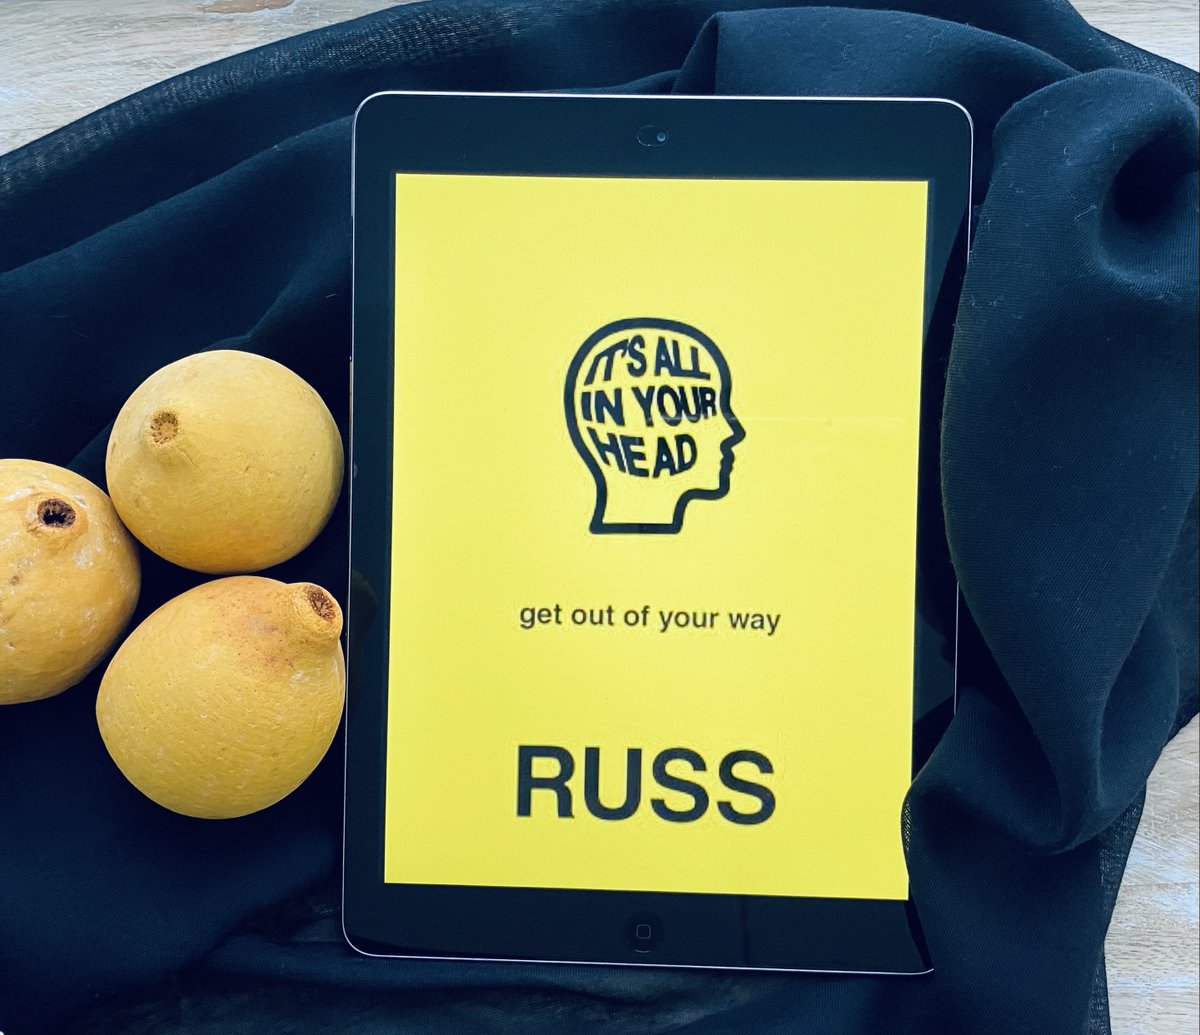 #ItsAllInYourHead by @russdiemon is an inspirational book written by musical superstar who understood the power of YOU – believing in yourself. As soon as I started reading this book, it hit me like a rock that I wasn’t confident enough in my pursuit. The danger is self-doubt.